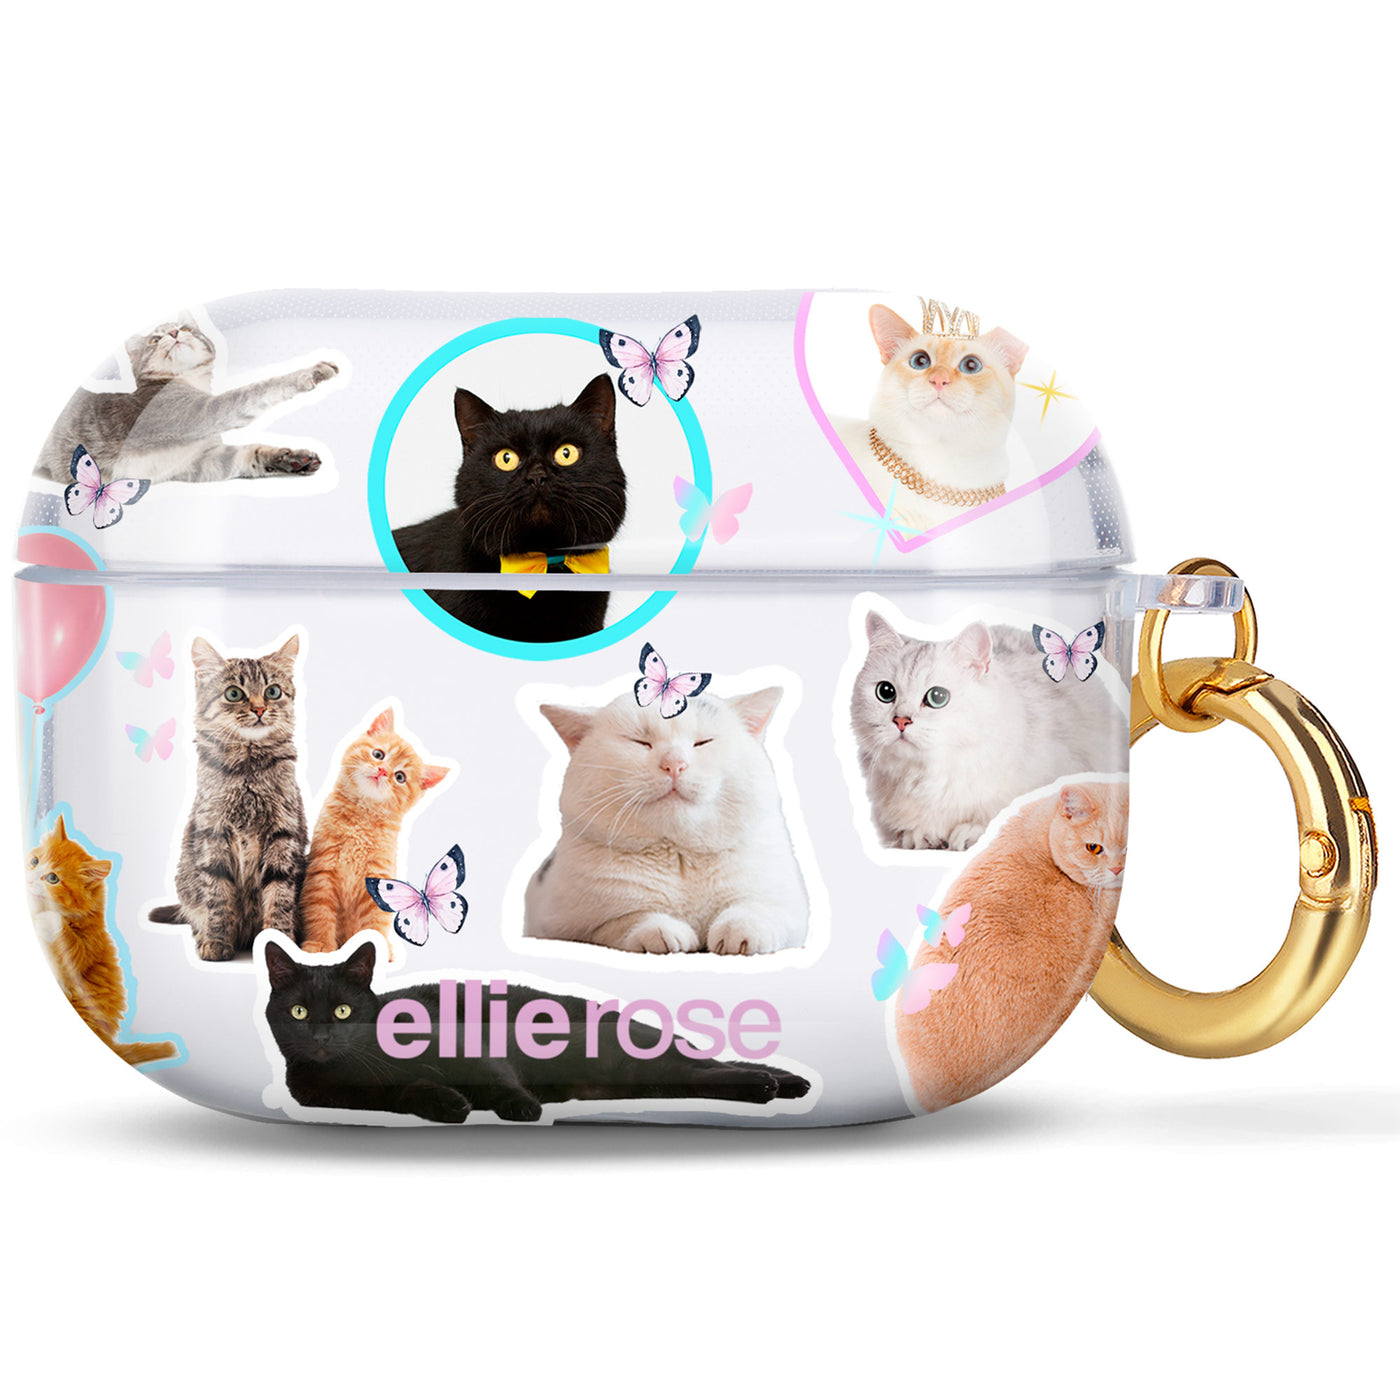 Meow Baby Airpods Pro Case